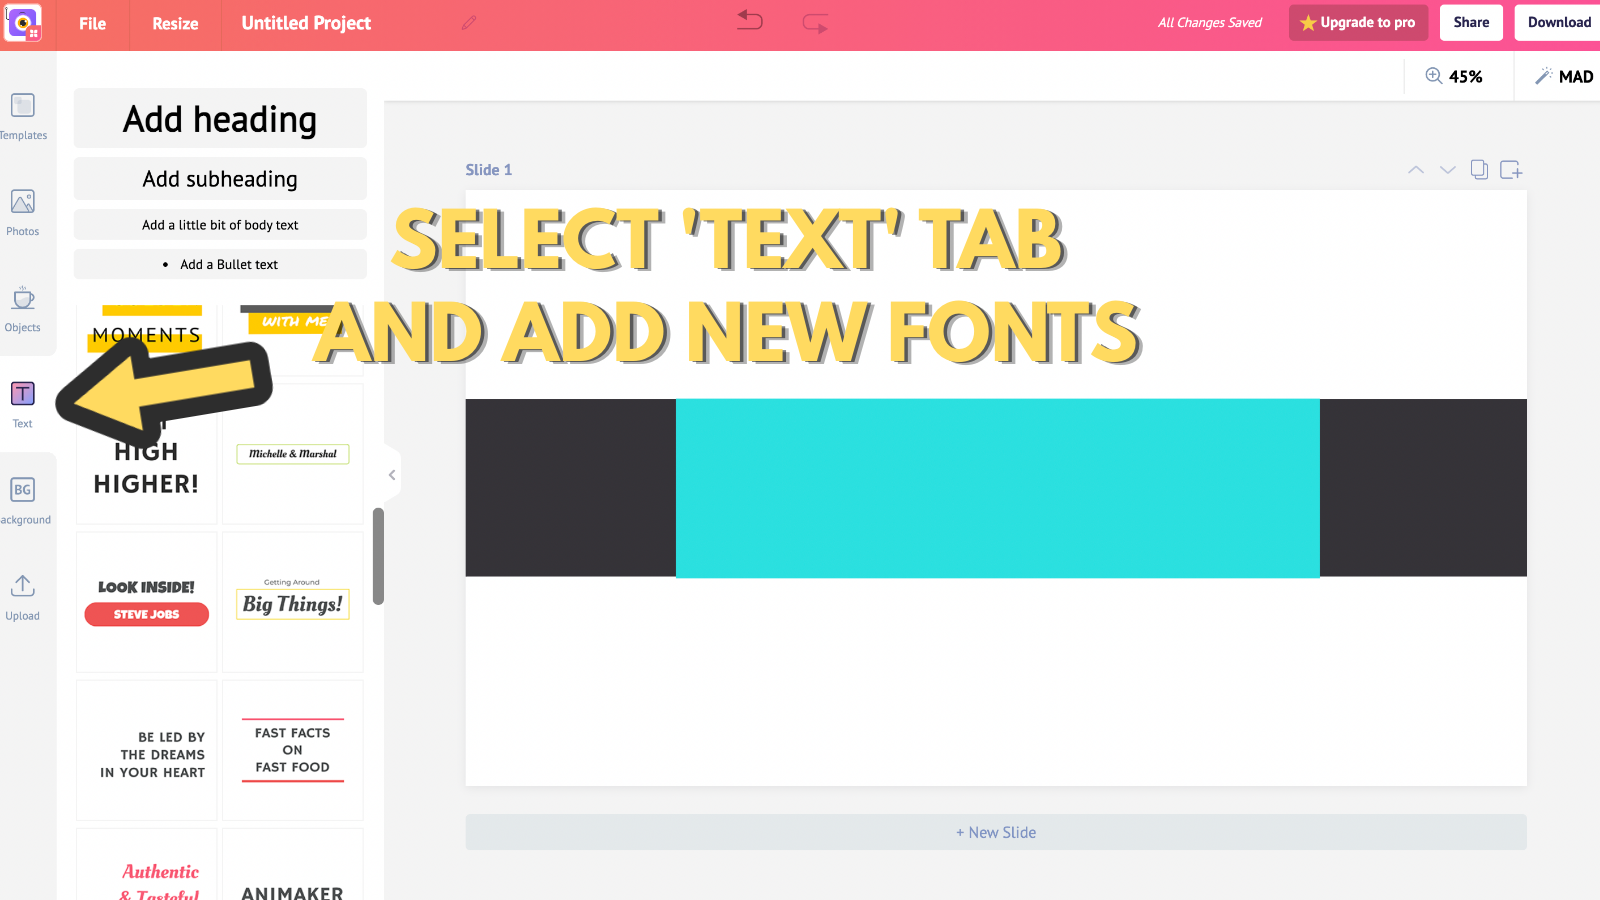 Screenshot that asks to select text tab and add new fonts (to make 2048 x 1152 YouTube banner)